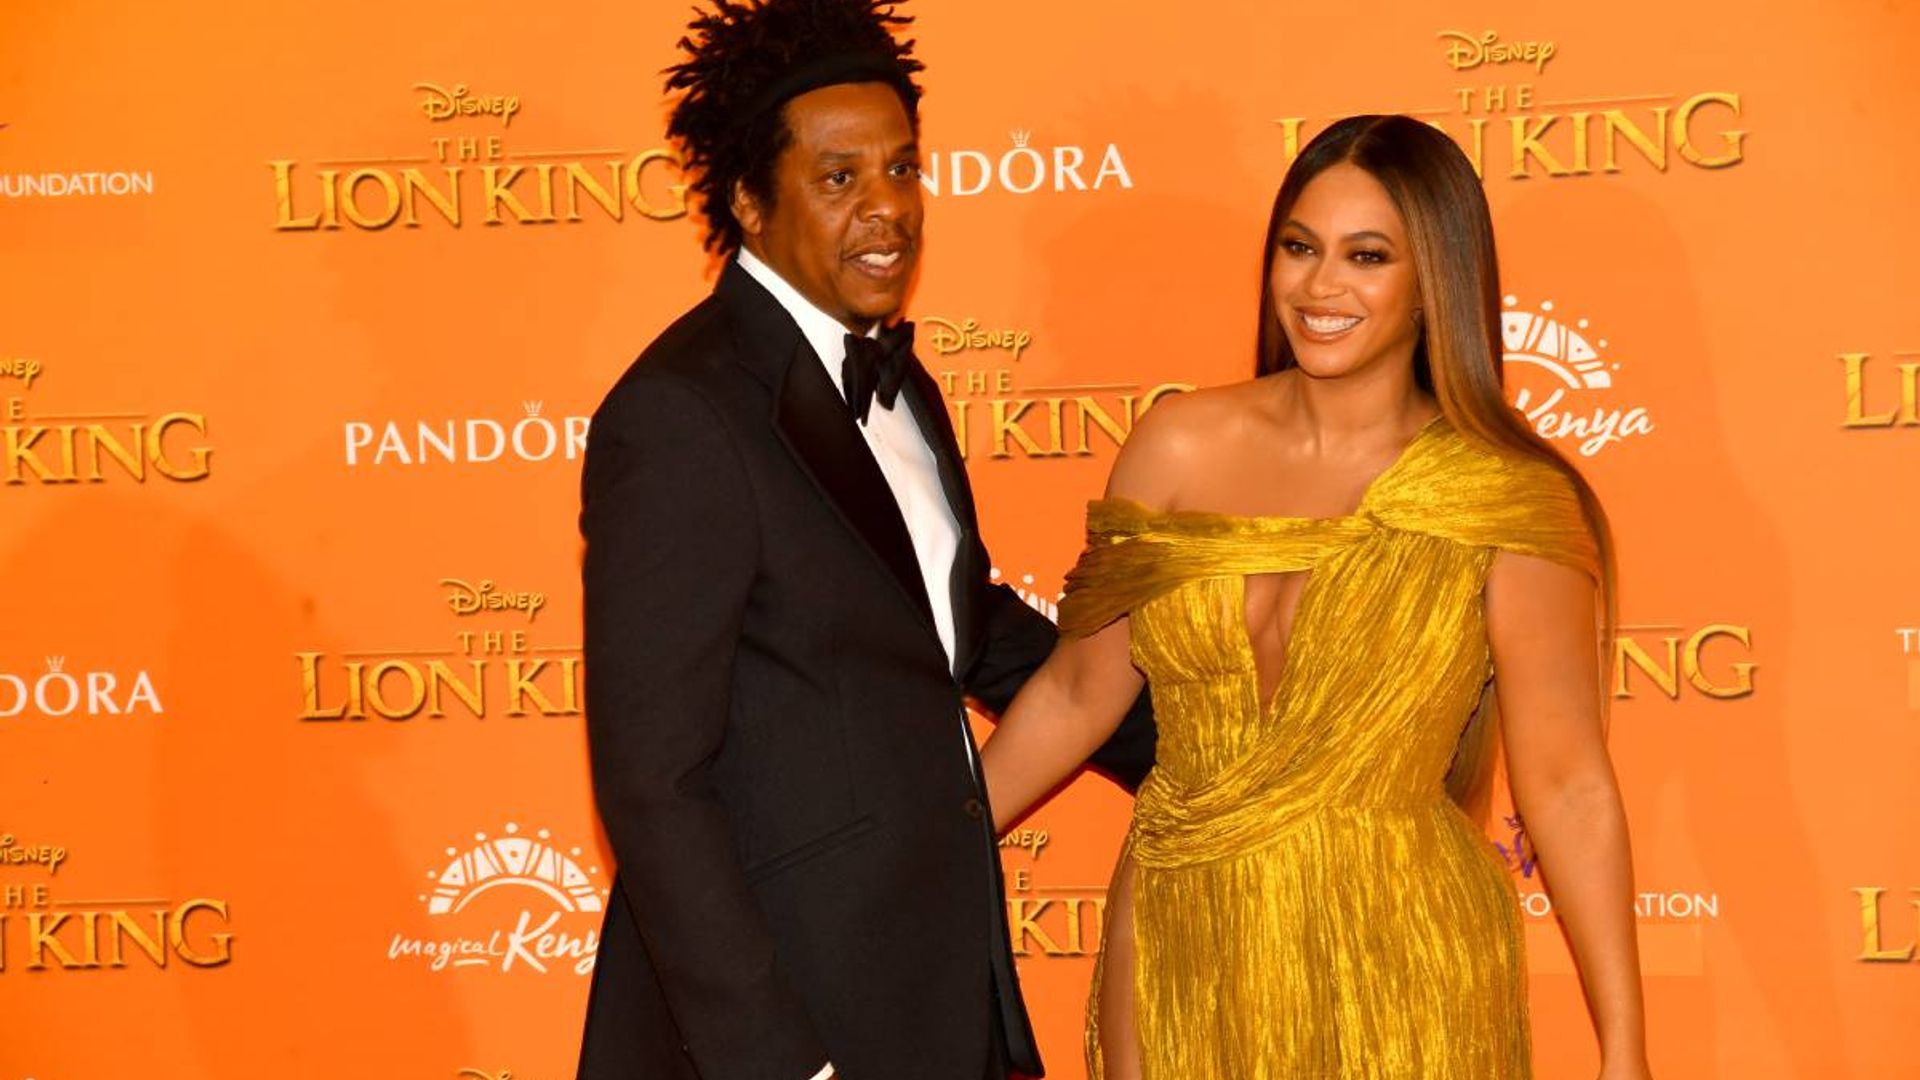 Beyoncé's mesmerizing backless dress sets Instagram on fire in gorgeous new photos with Jay-Z